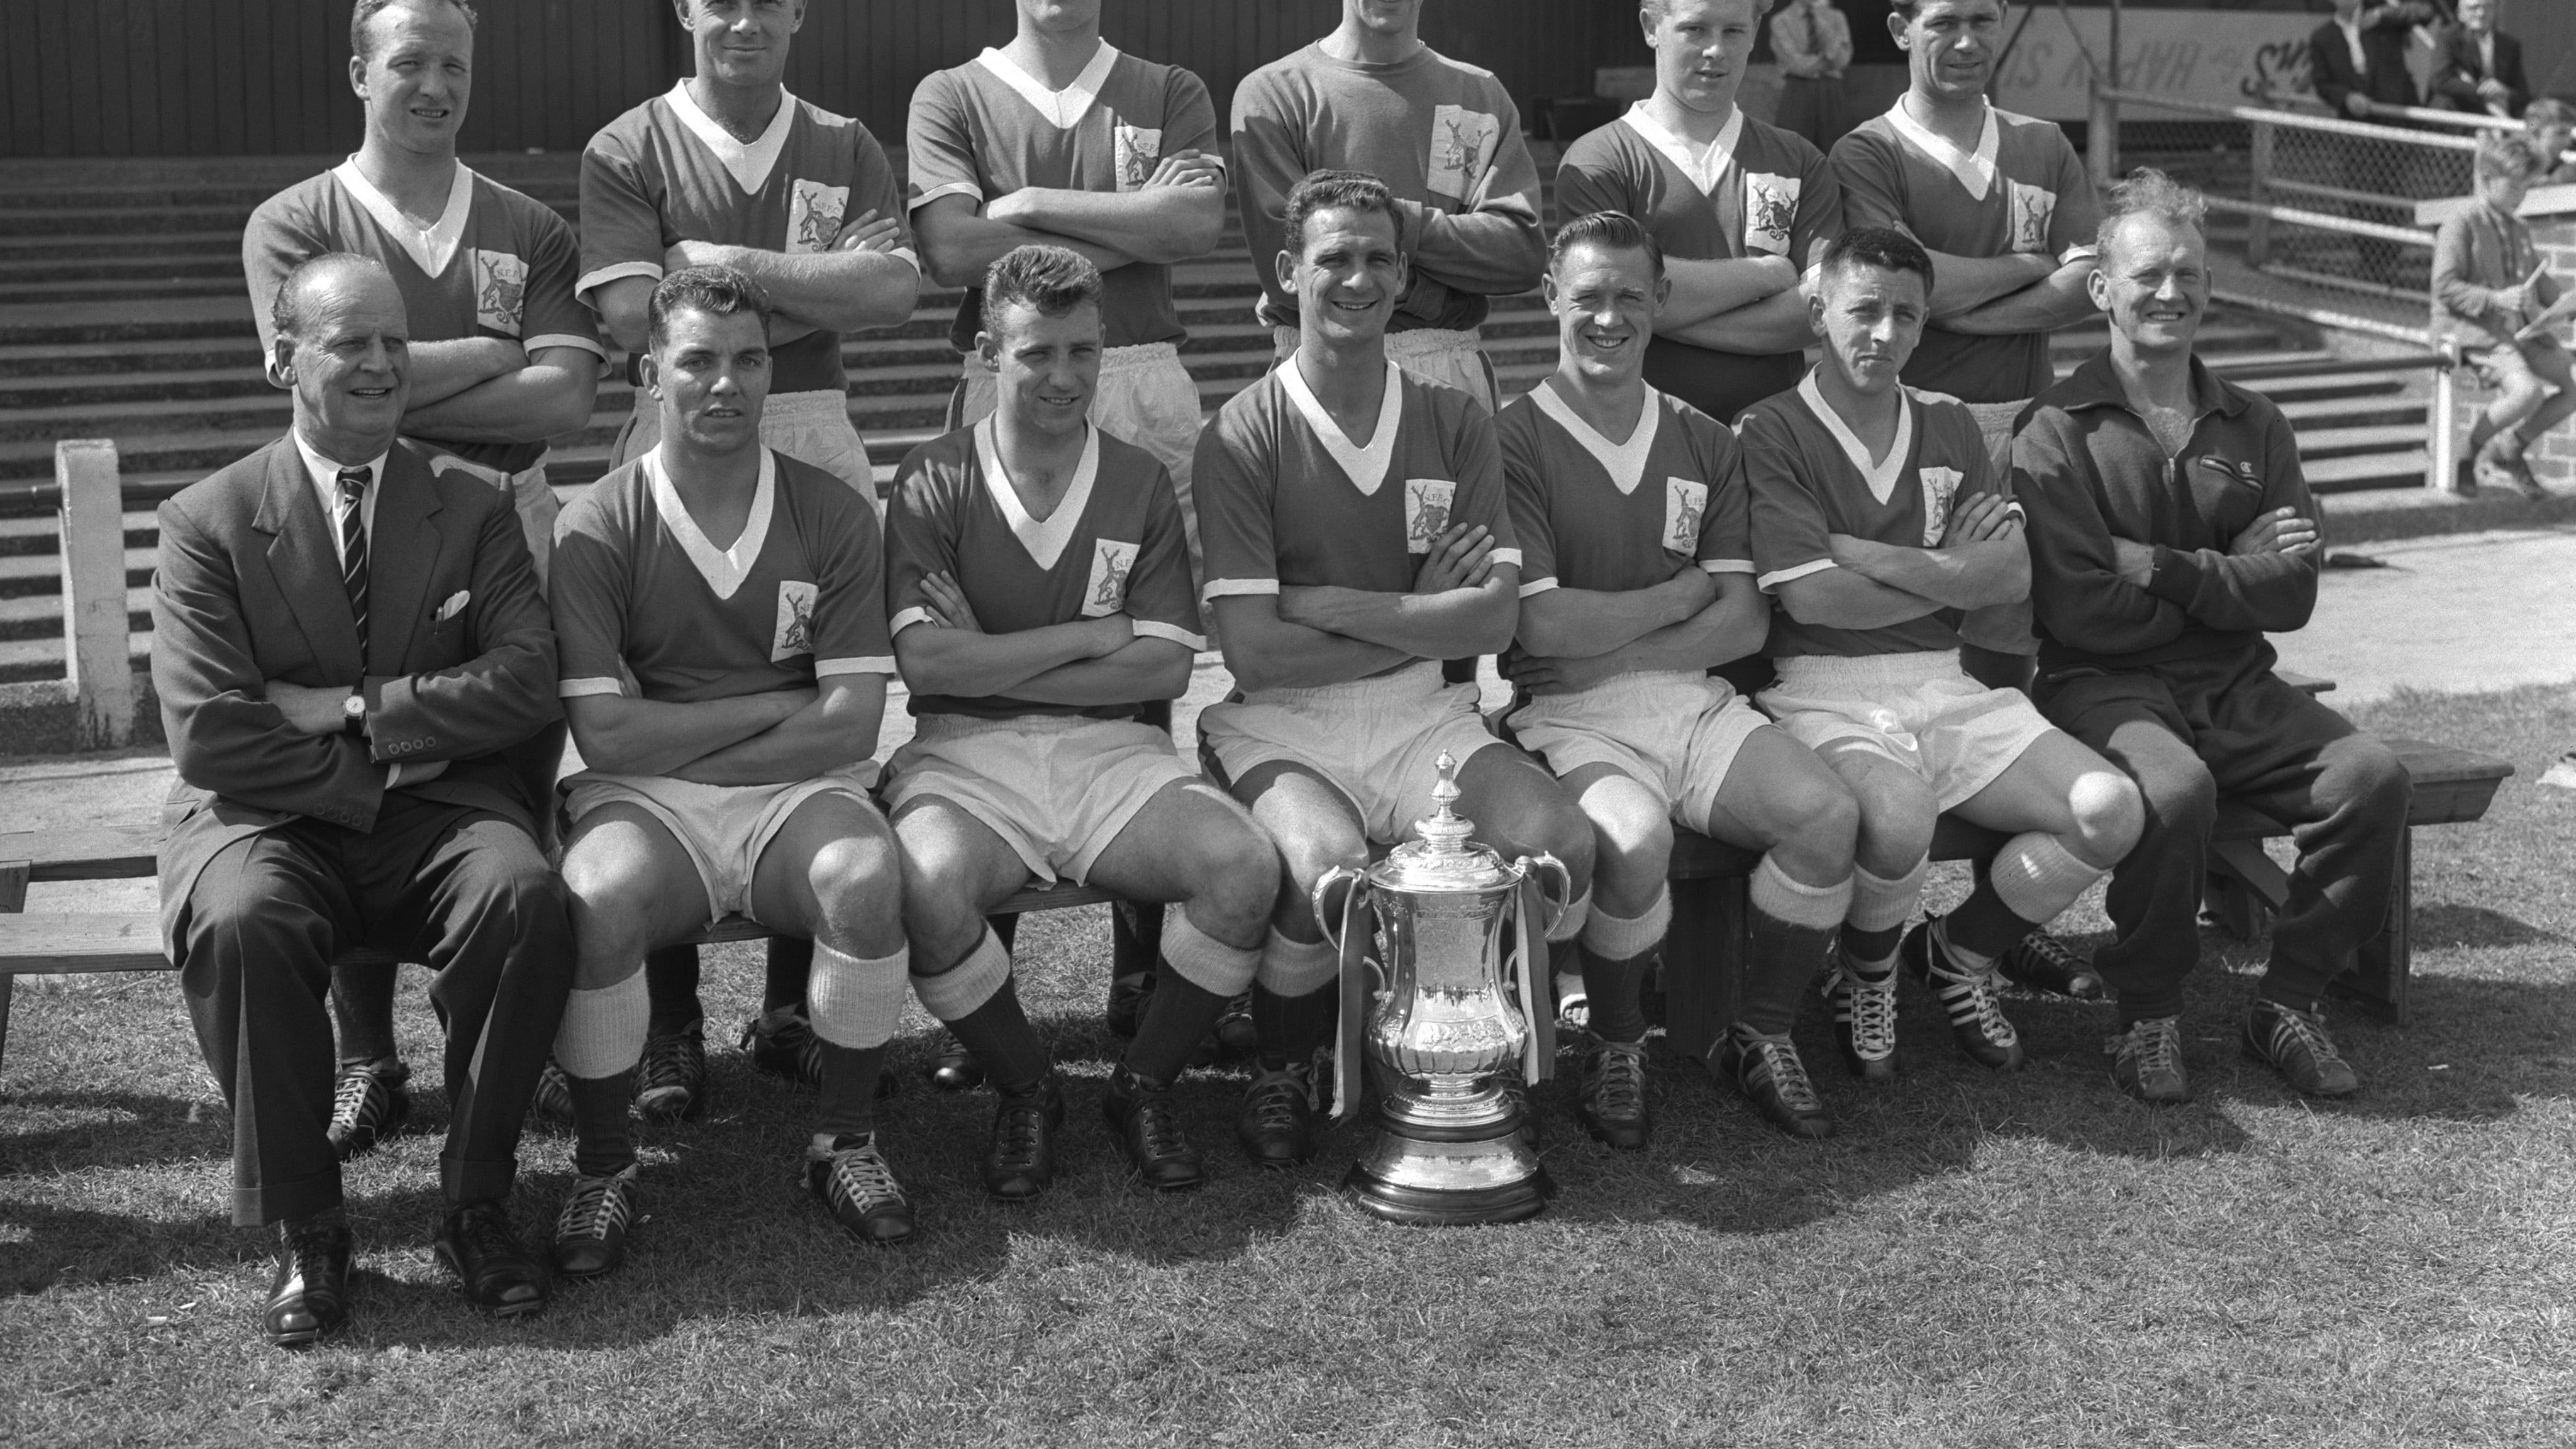 Former Manchester United and Nottingham Forest player Jeff Whitefoot (back row, far left) has died